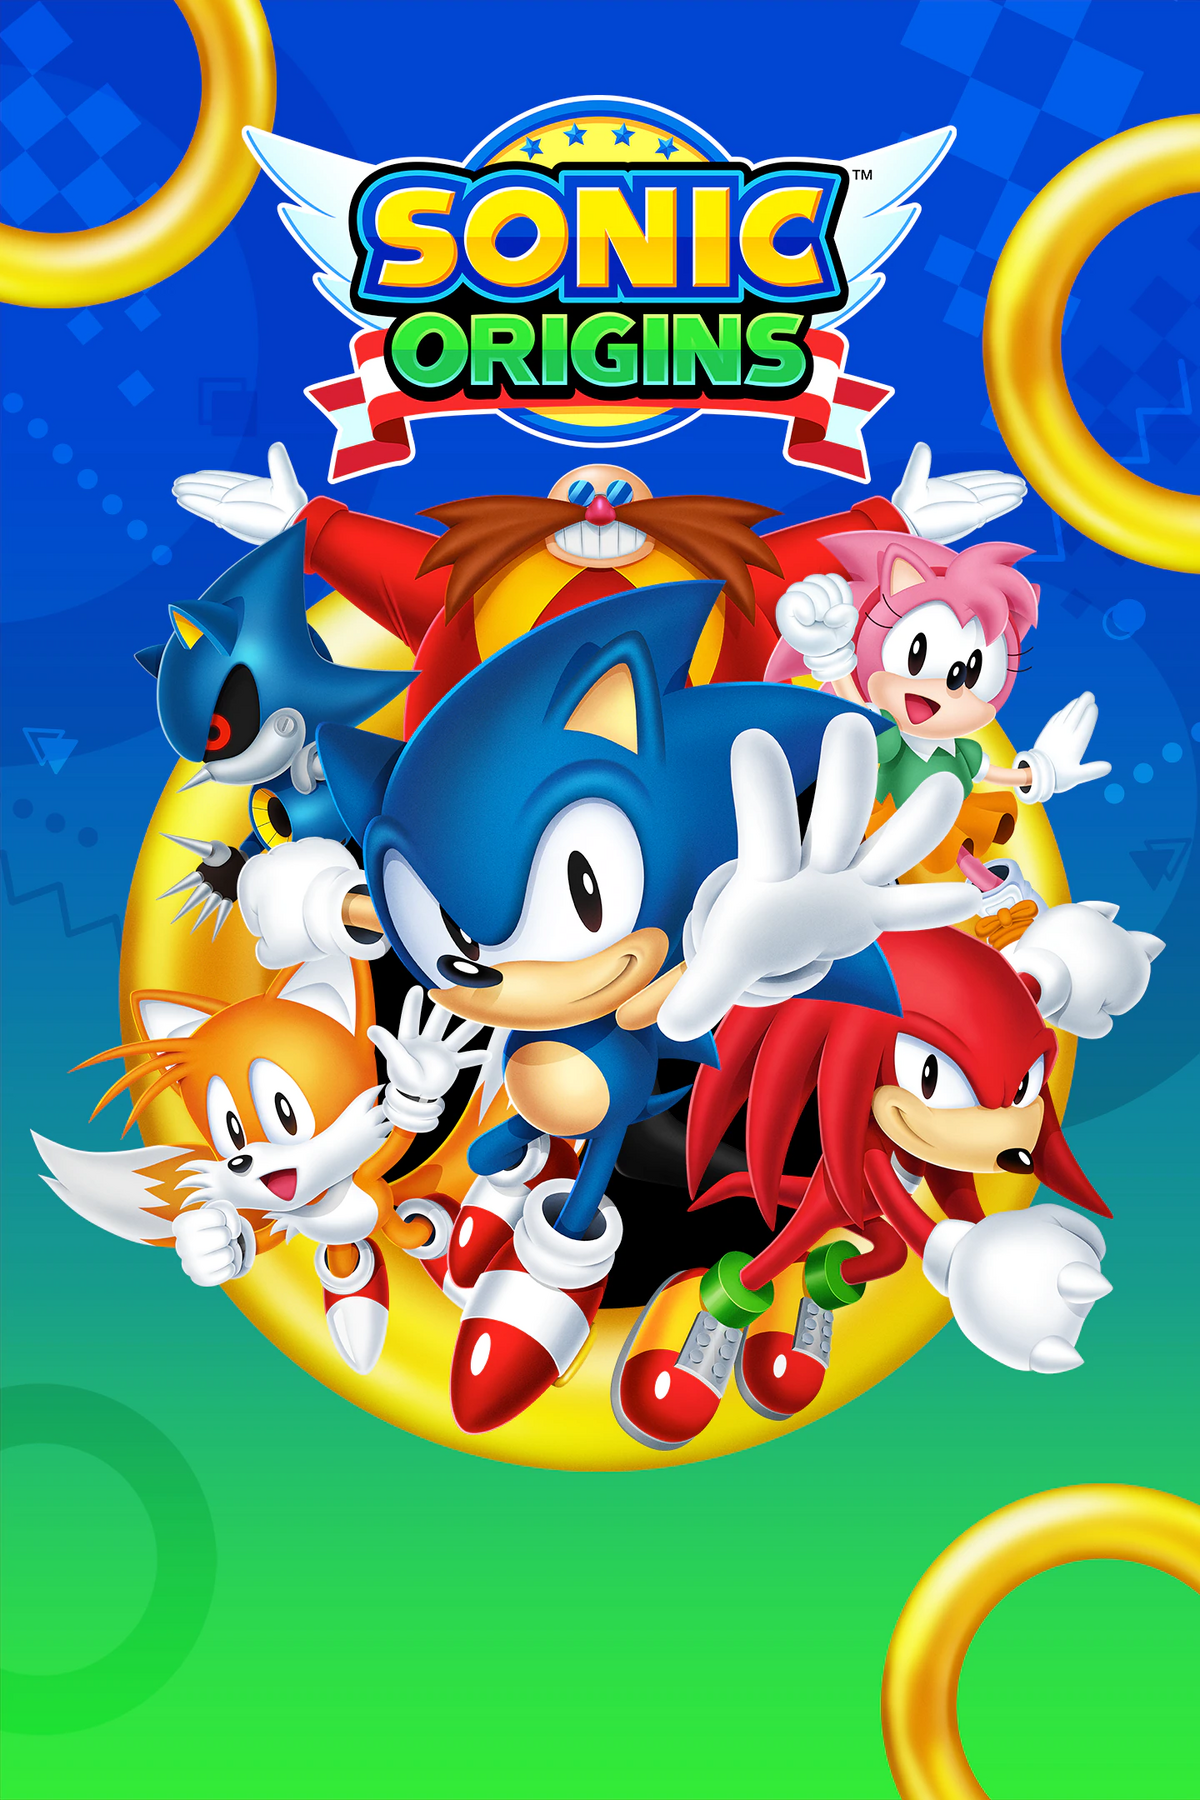 Review: Sonic Origins is a tragic example of good classics ruined by greed